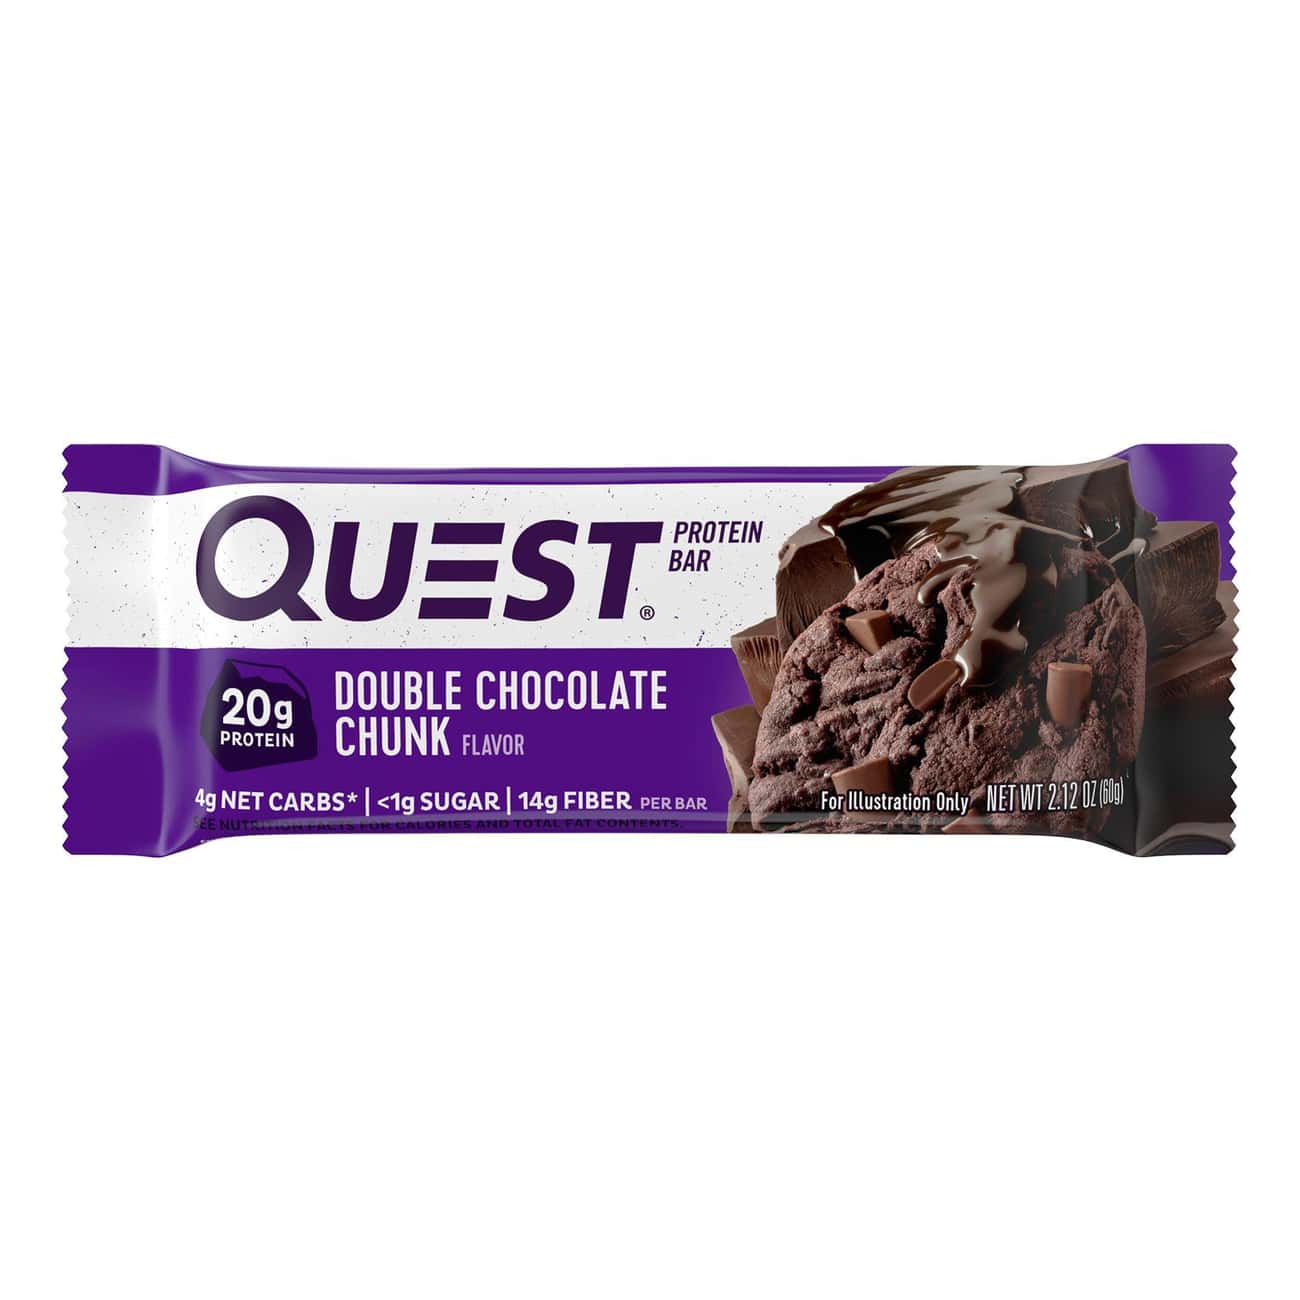 Ranking All 19 Quest Bar Flavors, Best To Worst